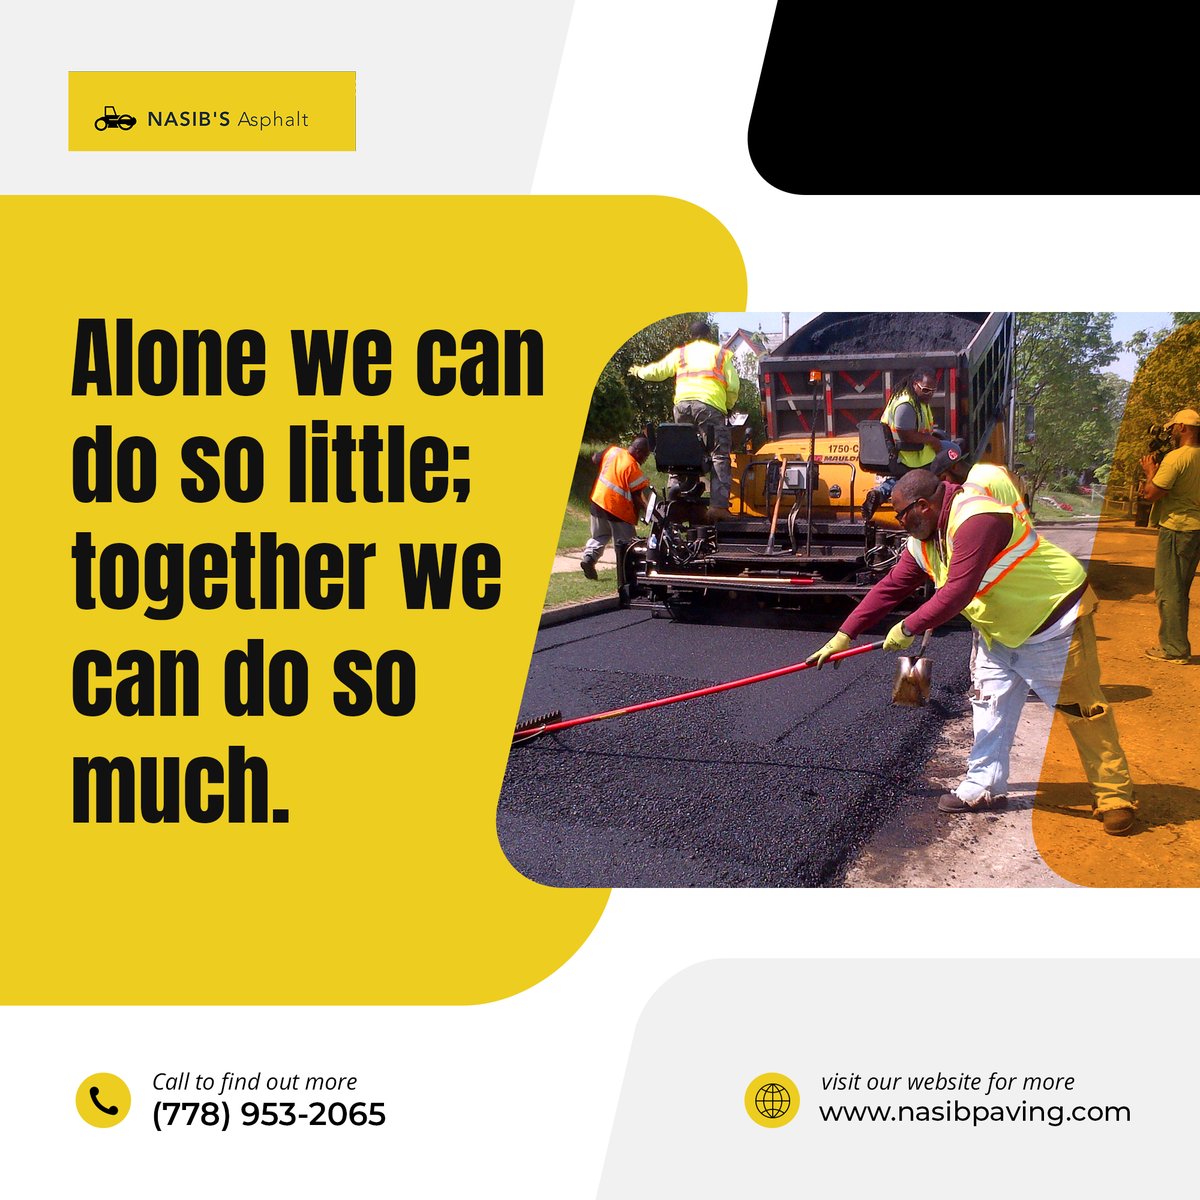 At Nasib Paving, we believe in the power of teamwork to make your dream project a reality!  

#Teamwork #DreamWork #NasibPaving #quoteoftheday #TrustedConstruction #PavingExperts #SealcoatingServices #QualityWorkmanship #DrivewayRepairs #ParkingLotSolutions #EnhanceYourSpace